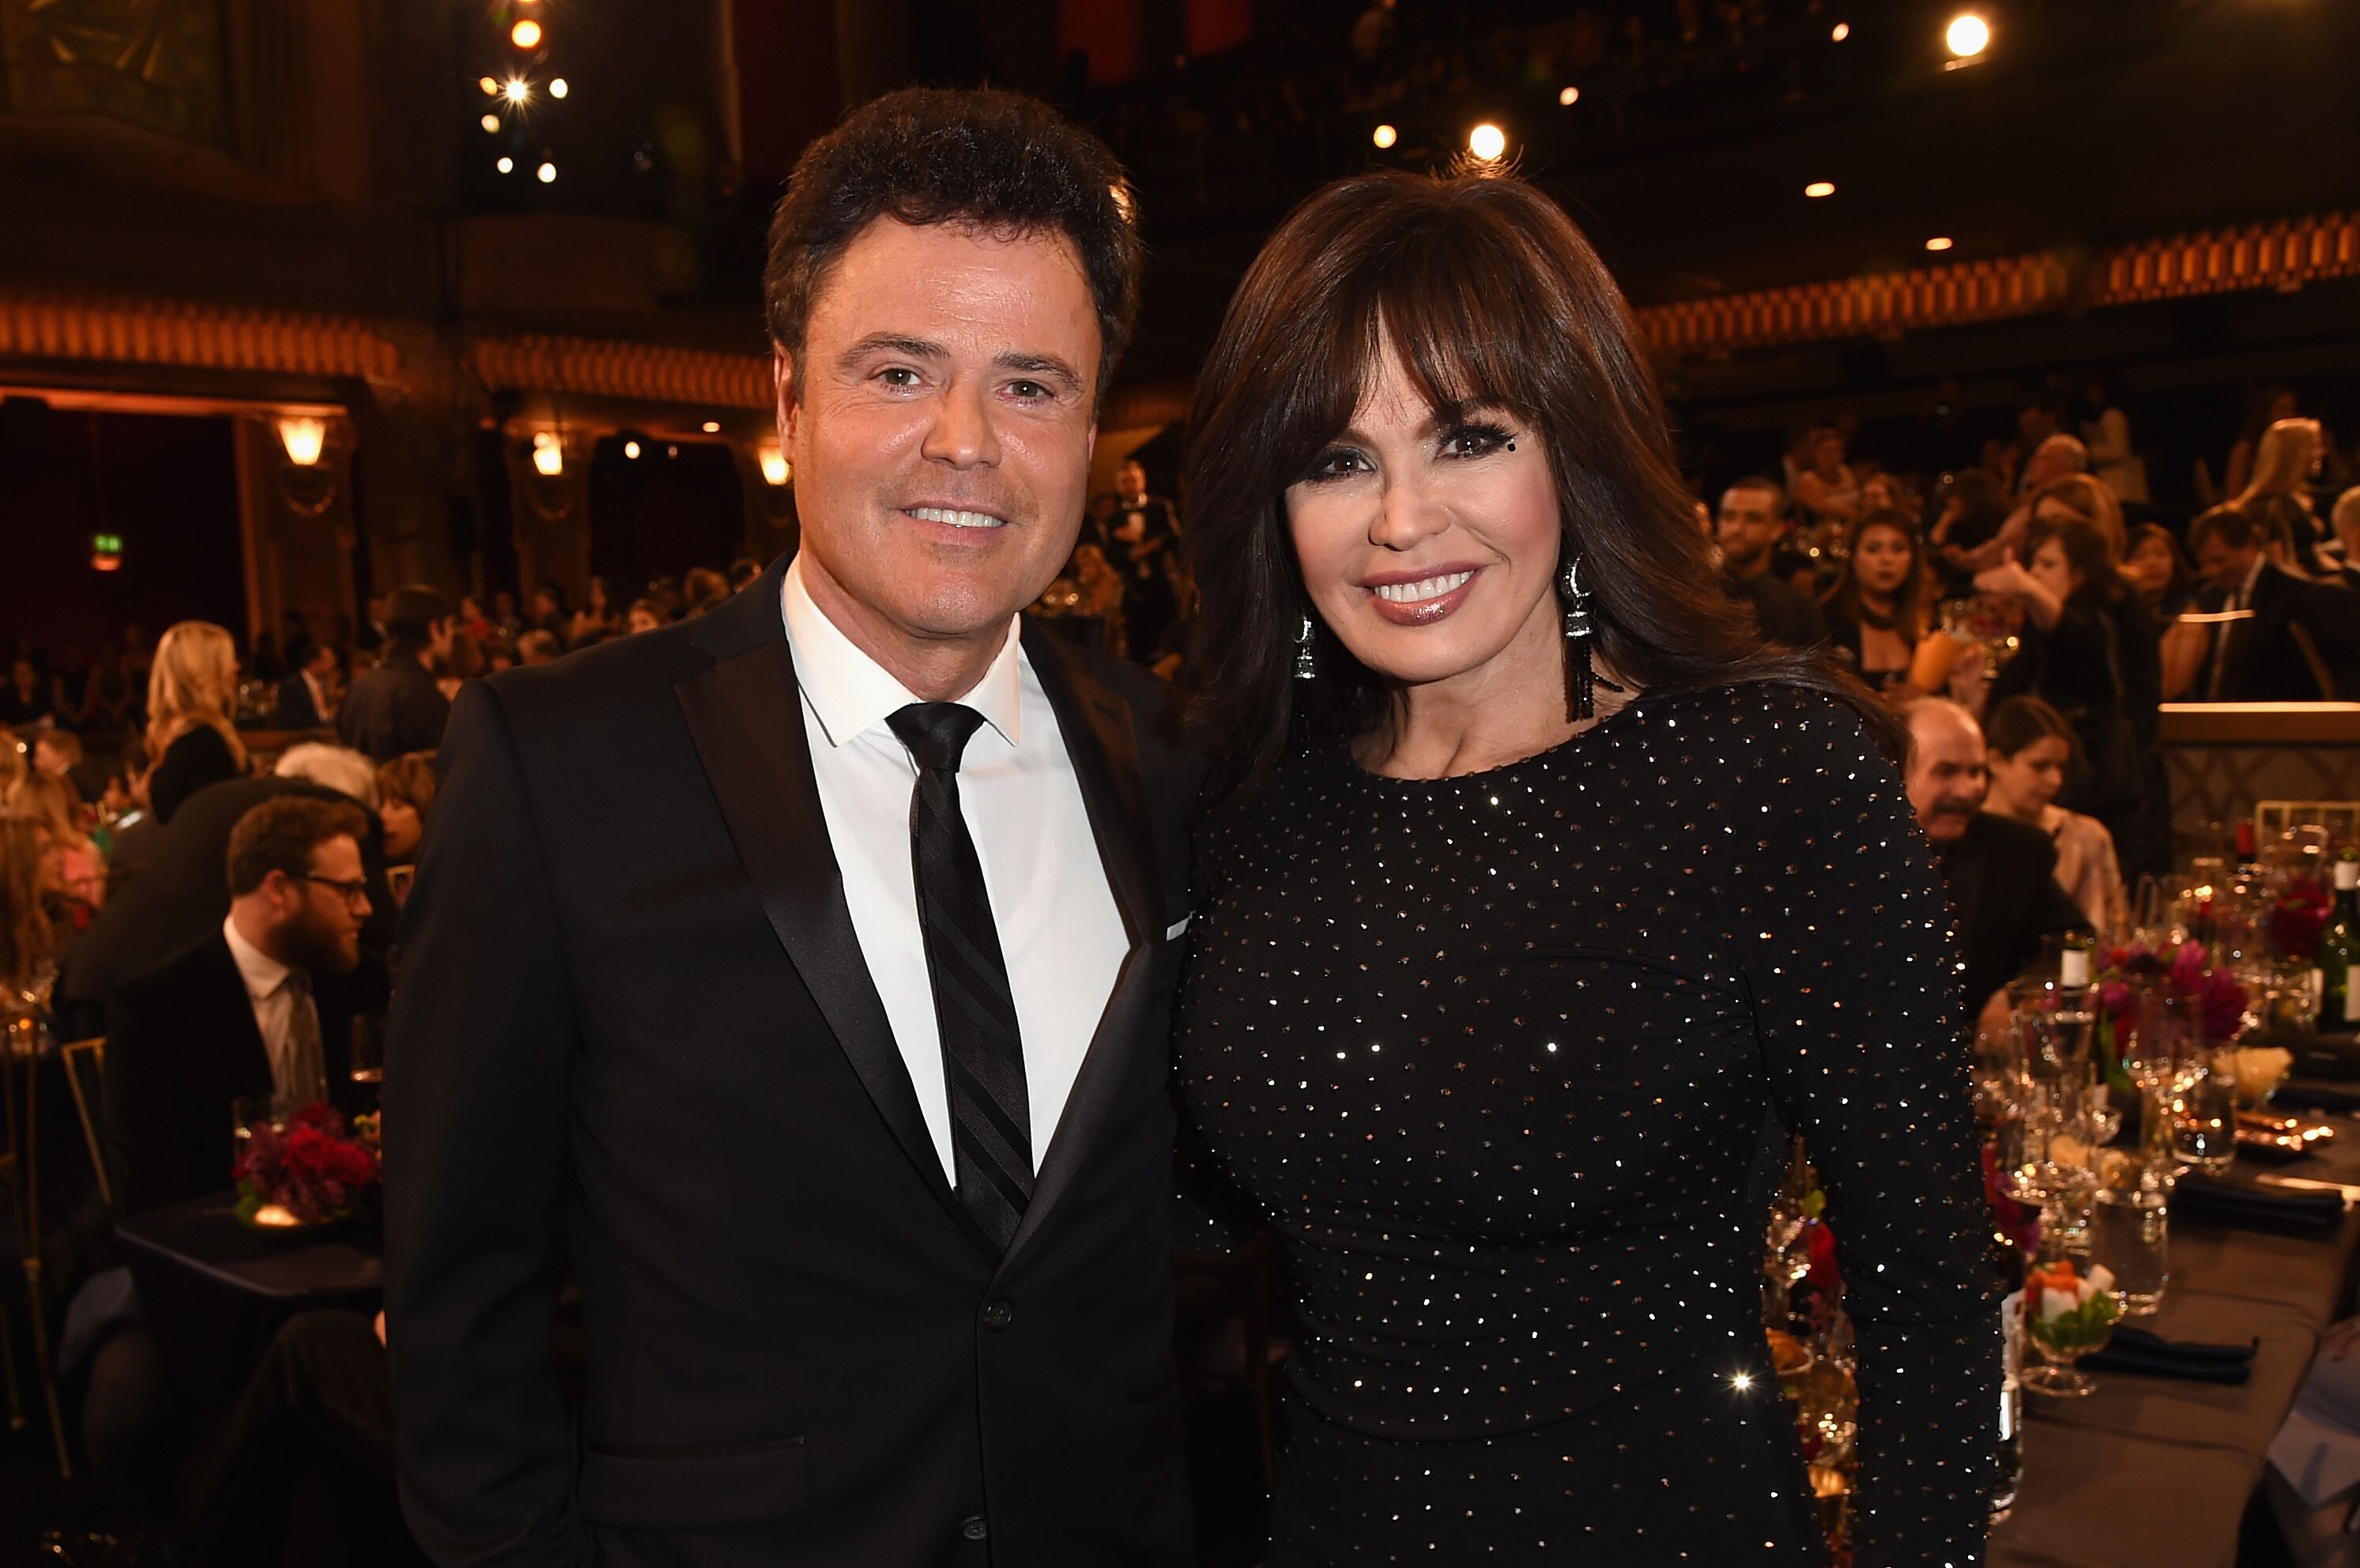 Donny and Marie Osmond at the 2015 TV Land Awards at Saban Theatre on April 11, 2015 in Beverly Hills, California | Photo: Jason Merritt/Getty Images